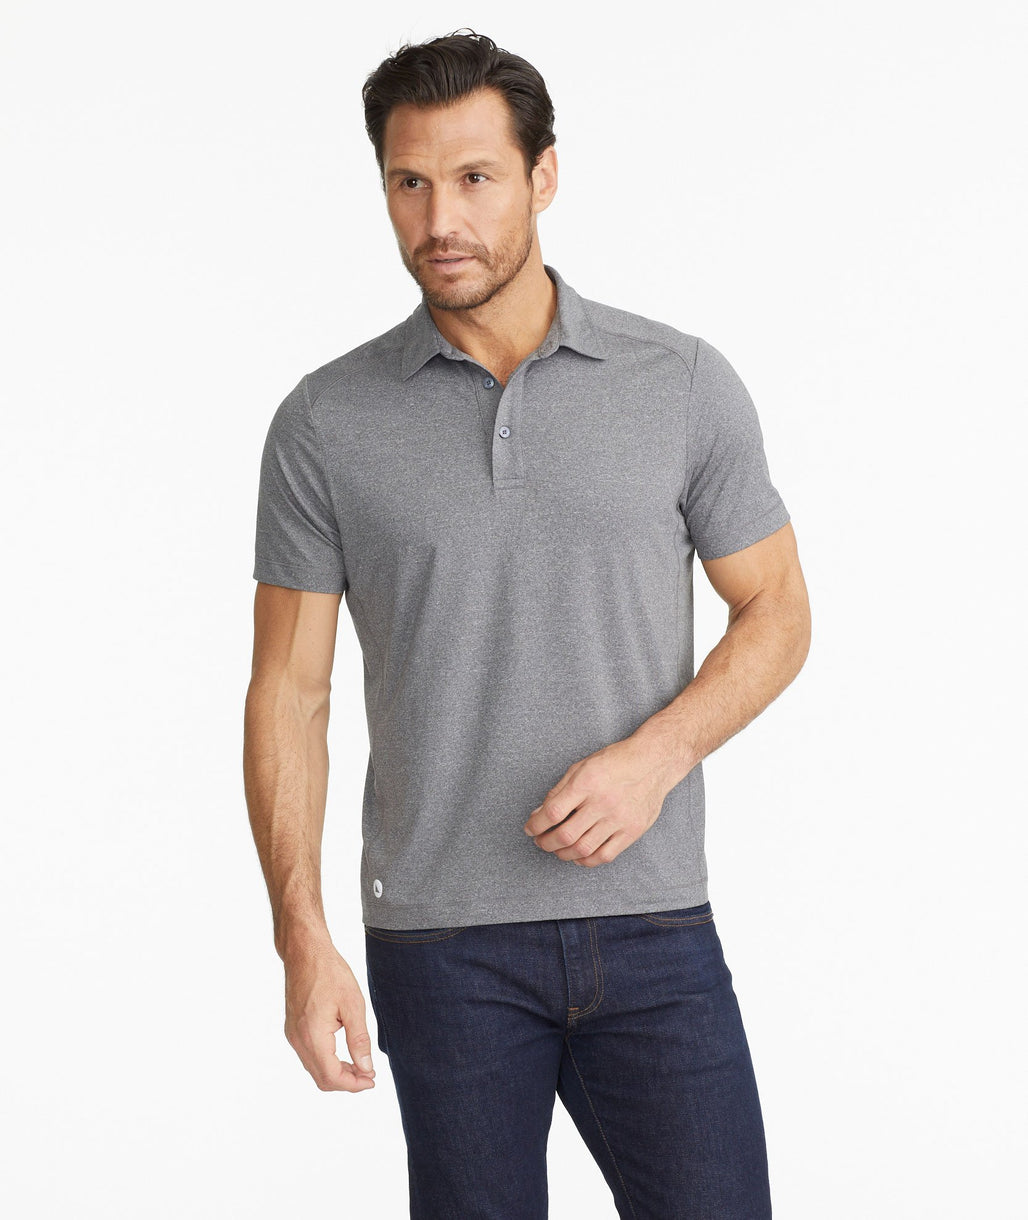 Model wearing a Grey The Performance Polo